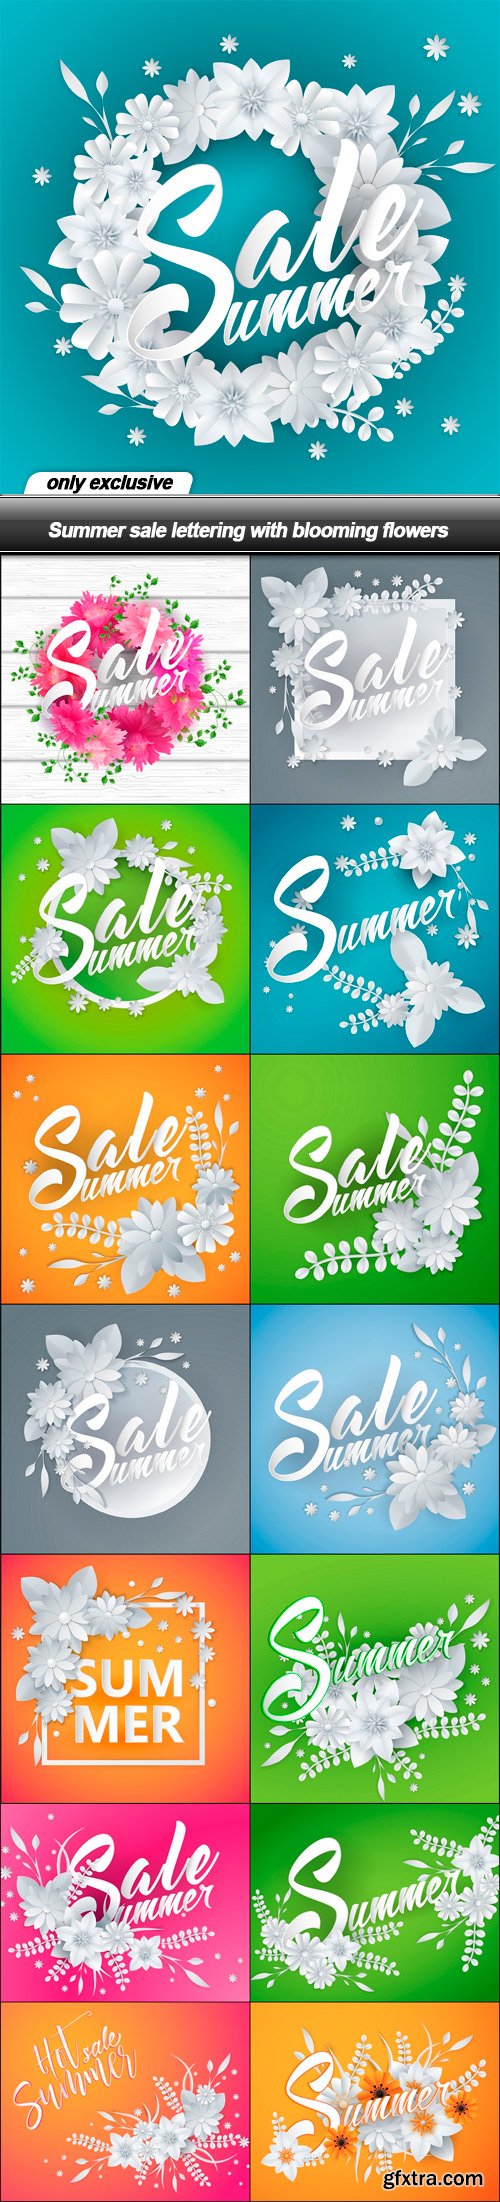 Summer sale lettering with blooming flowers - 15 EPS